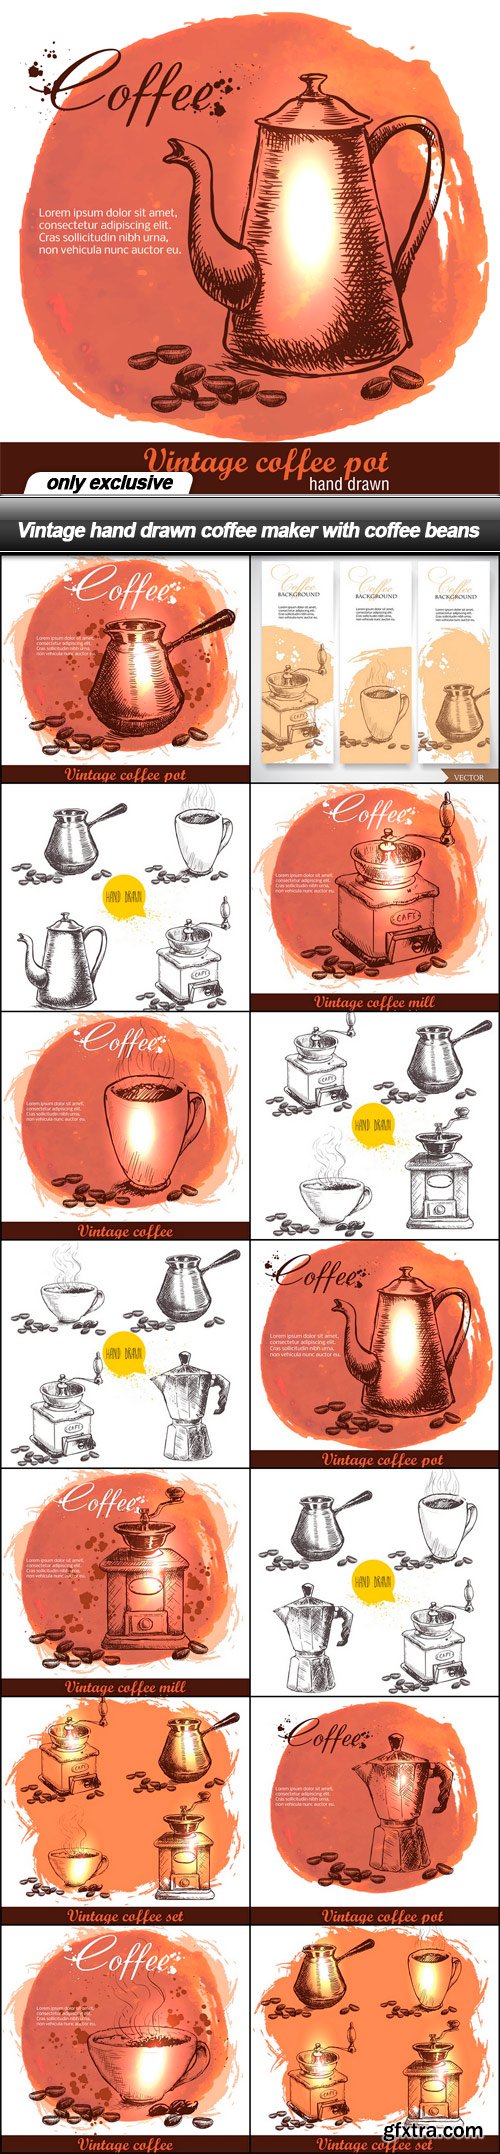 Vintage hand drawn coffee maker with coffee beans - 14 EPS